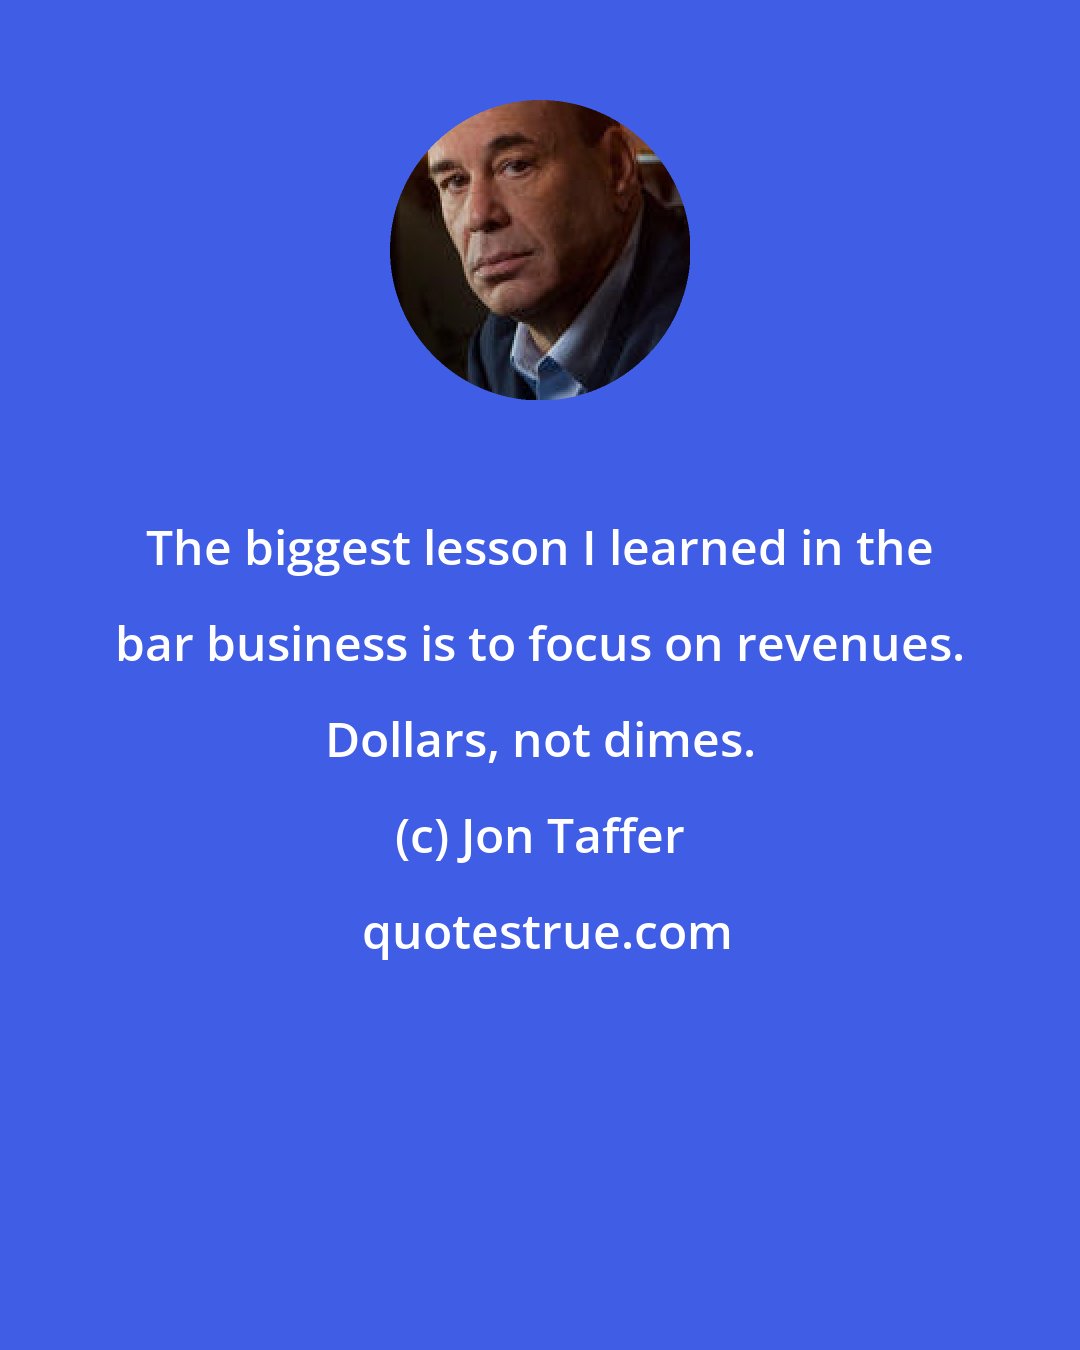 Jon Taffer: The biggest lesson I learned in the bar business is to focus on revenues. Dollars, not dimes.